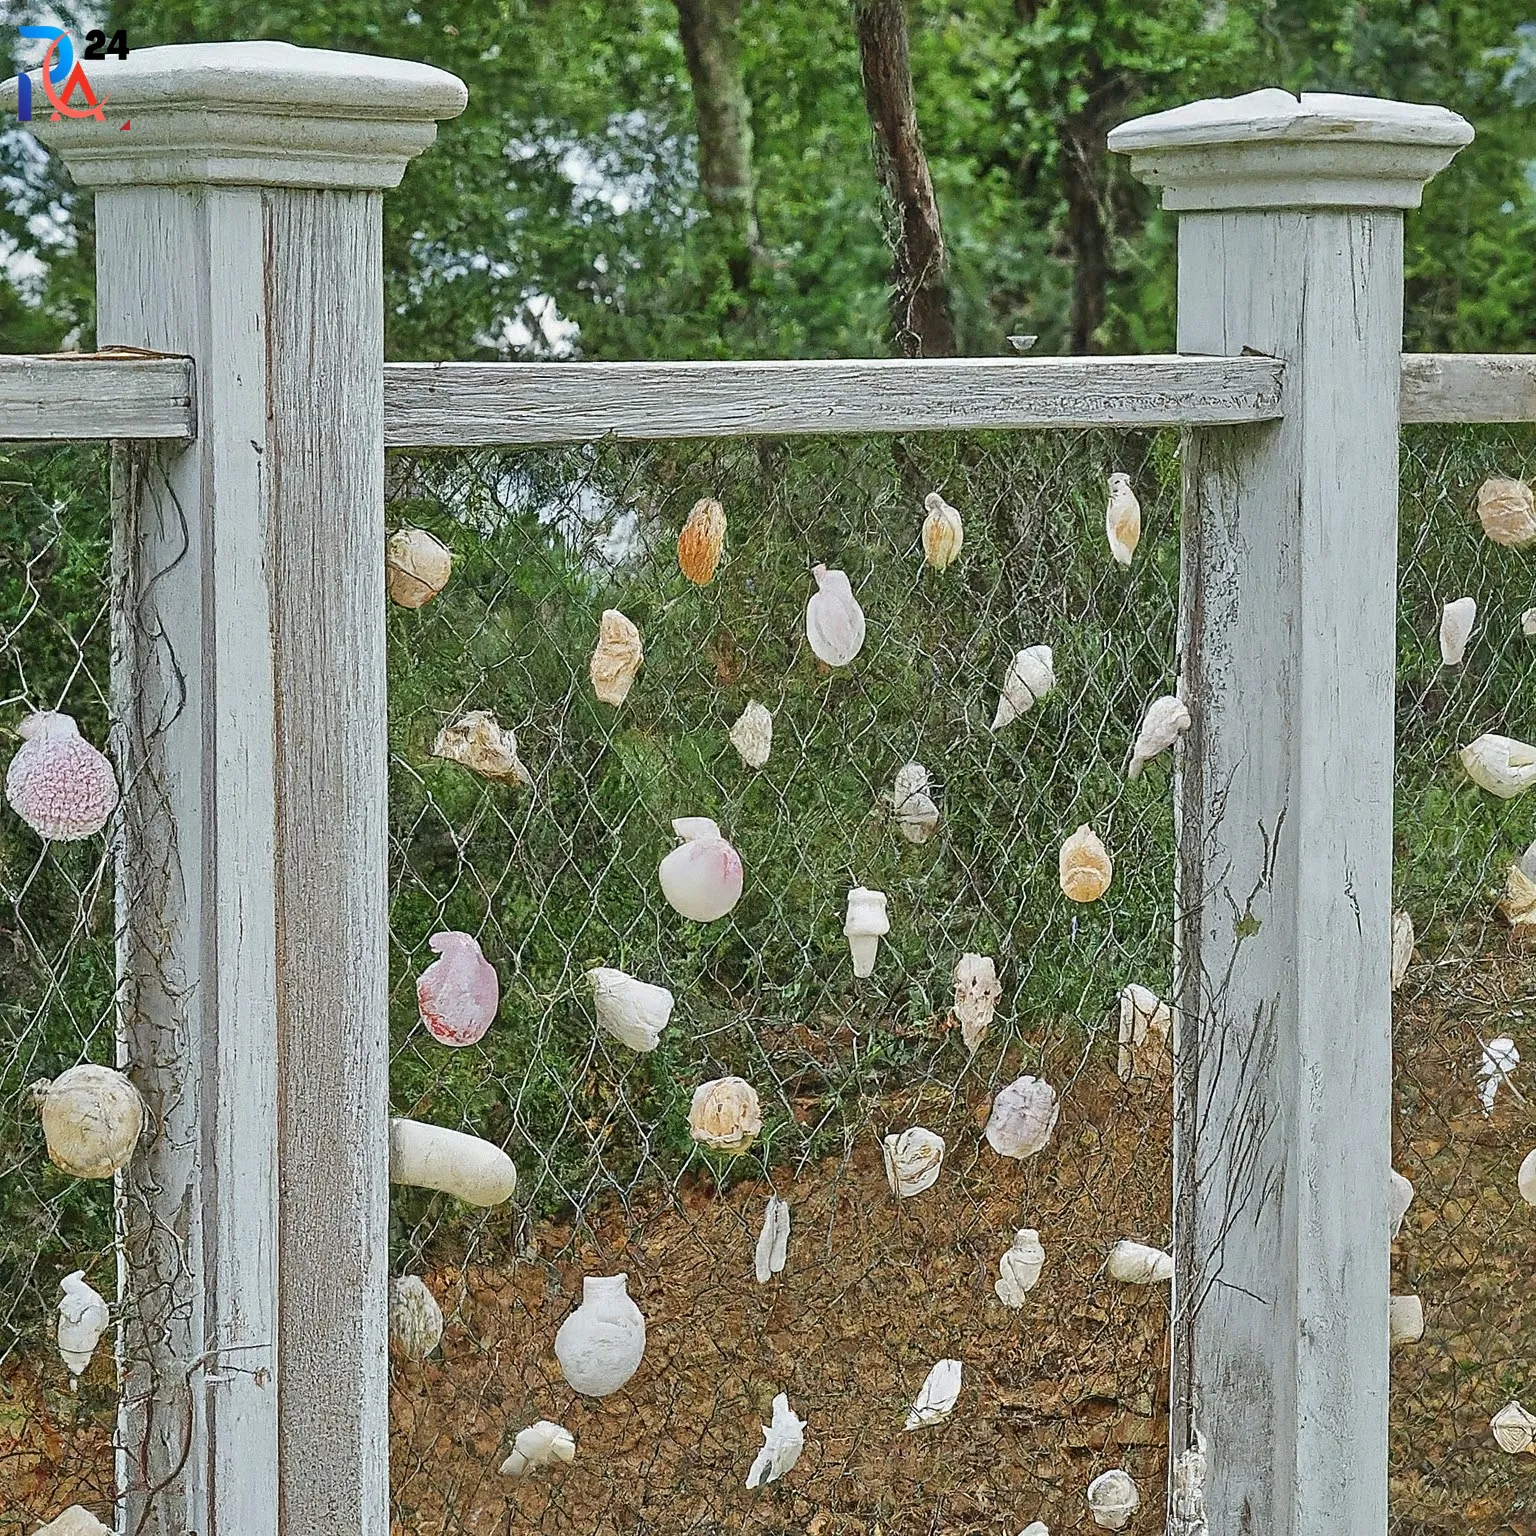 wood and wire fence ideas41